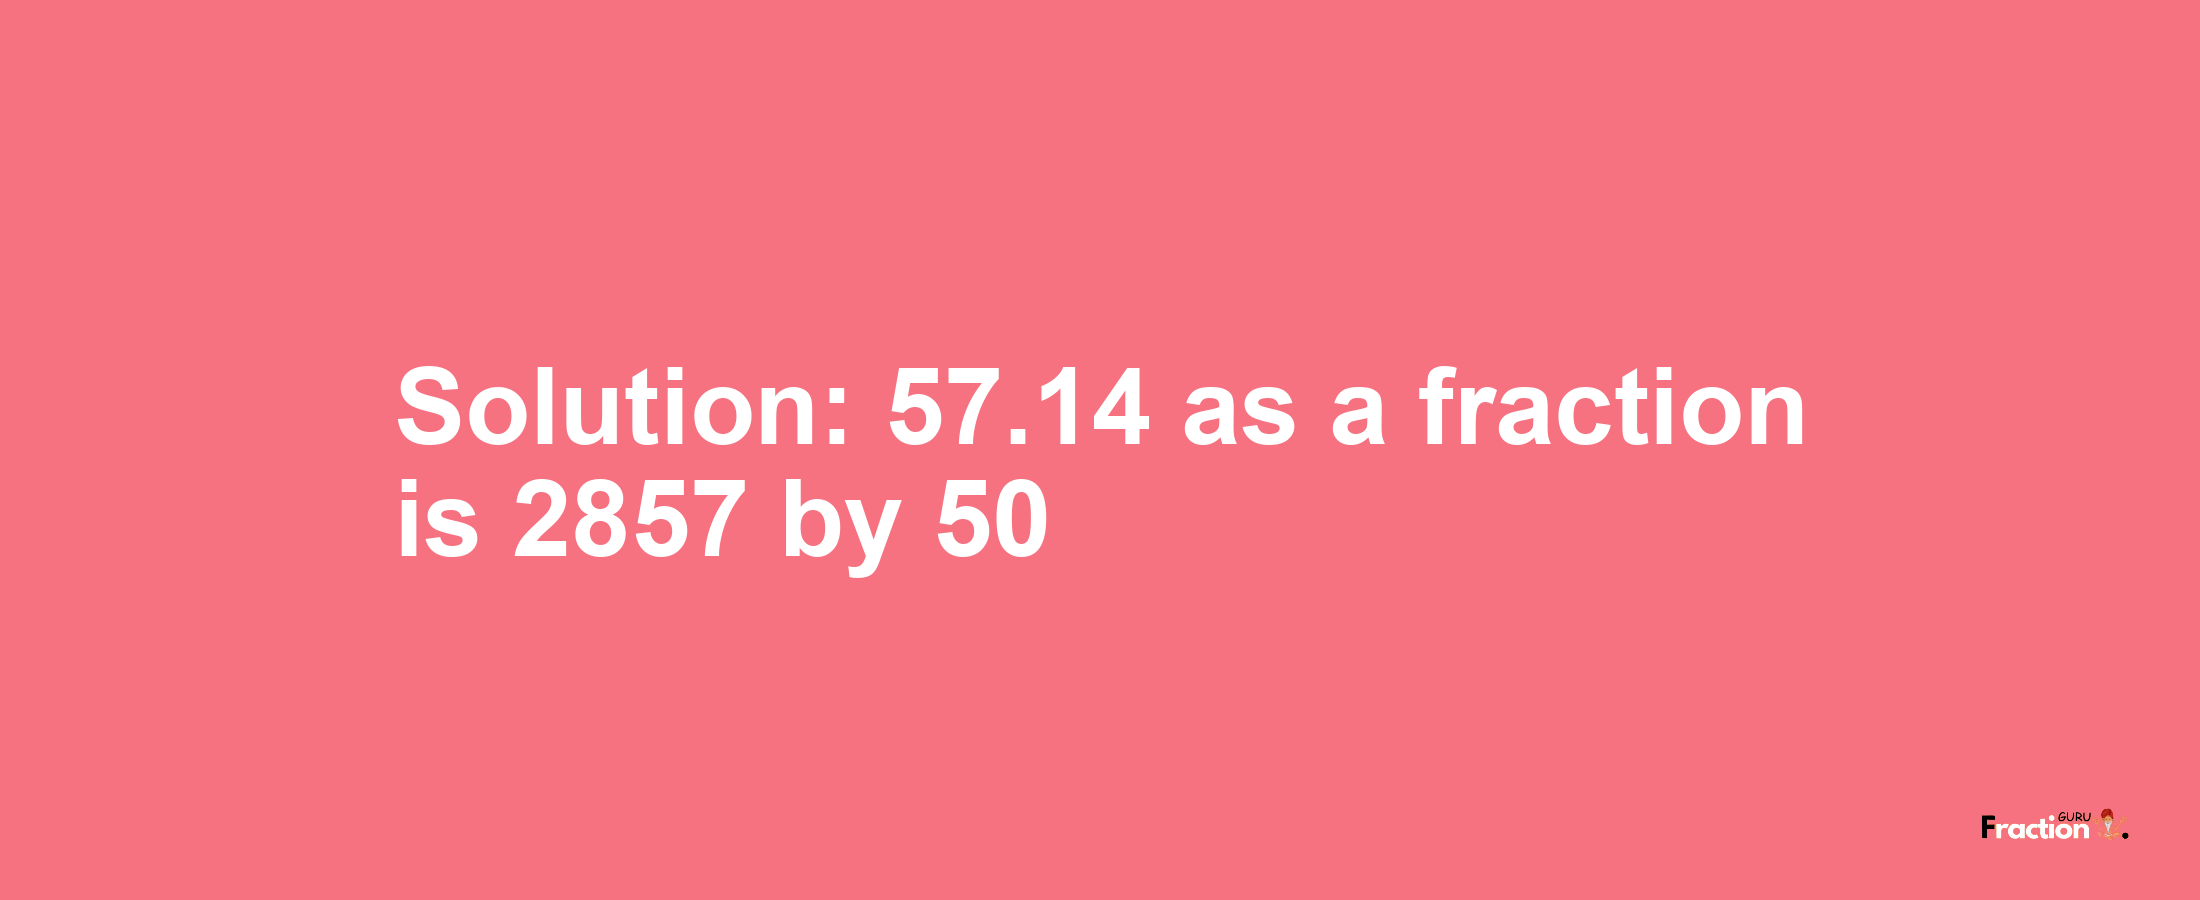 Solution:57.14 as a fraction is 2857/50